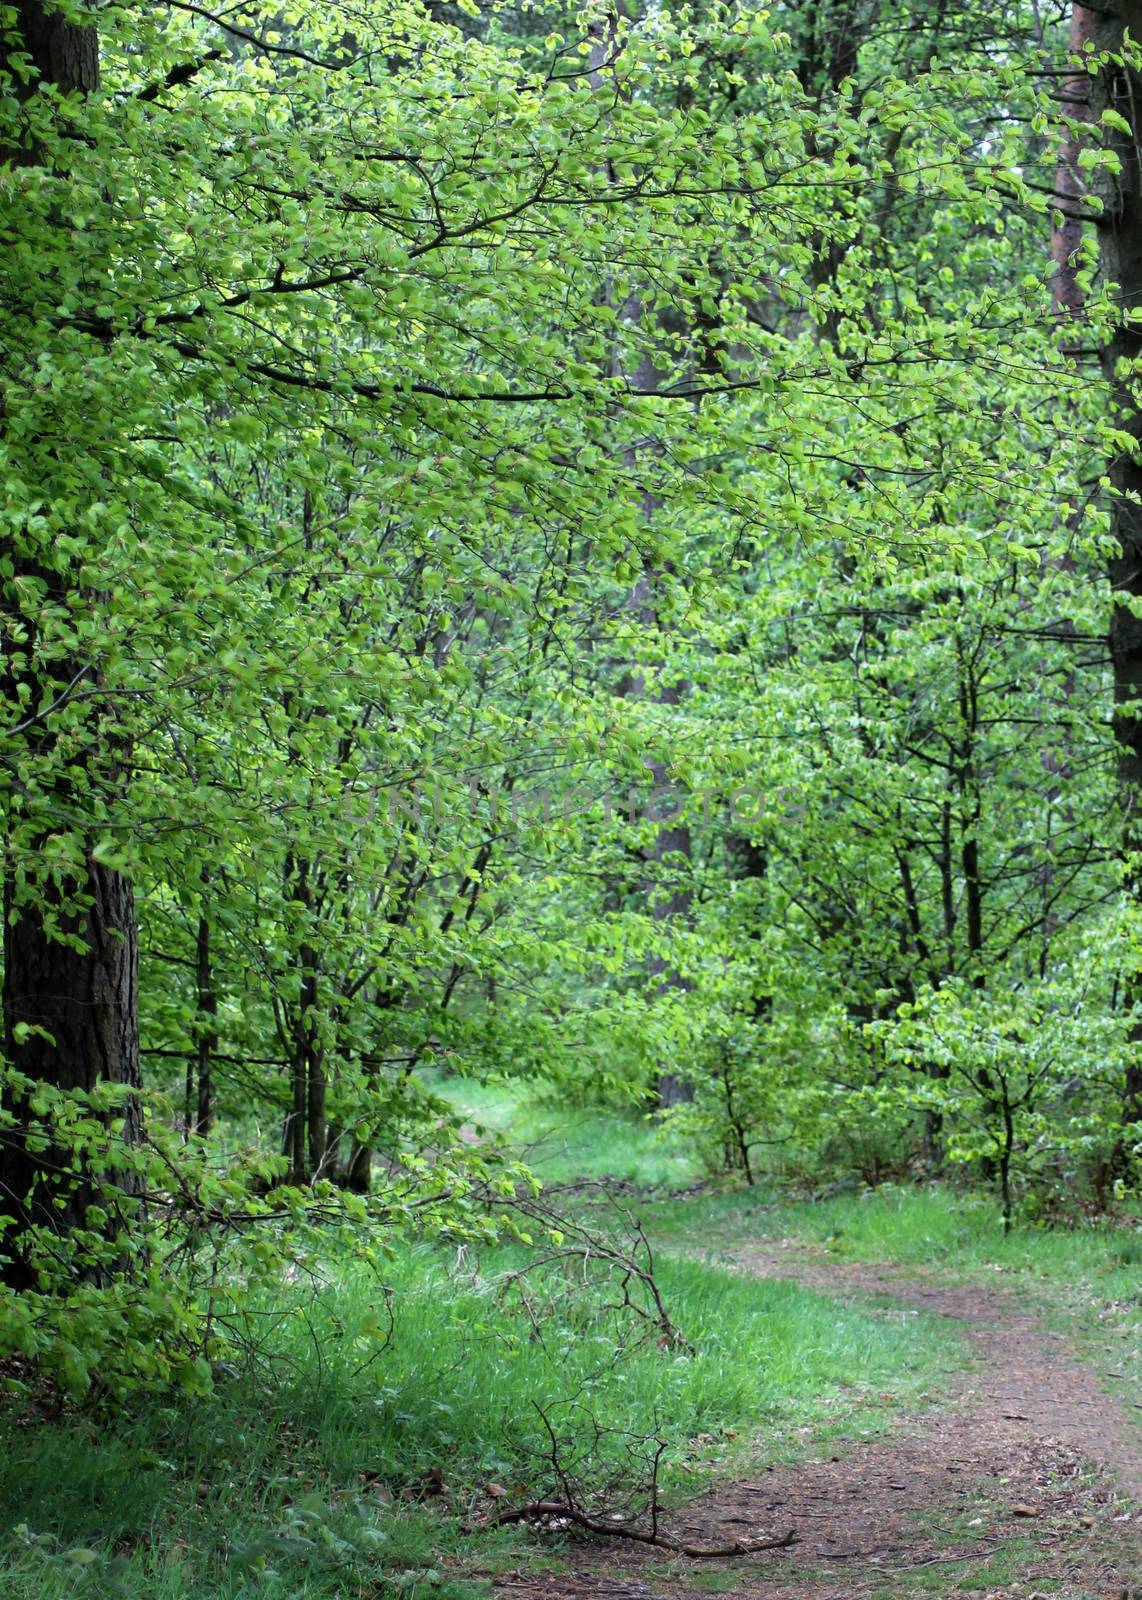 Scenic view of pathway receding through leafy green forest in countryside.